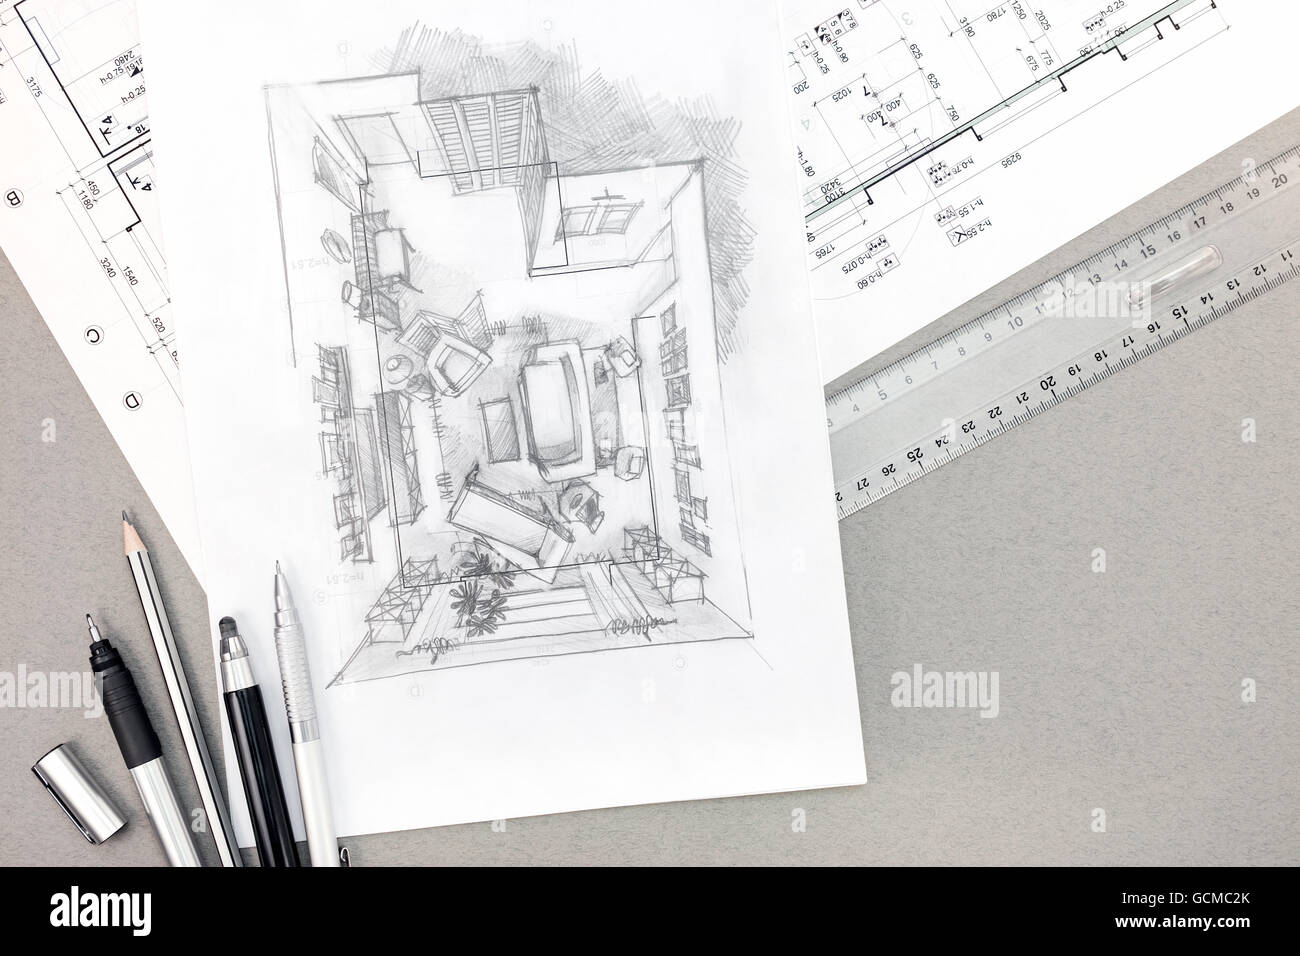 architectural sketch with technical drawing and pencils on desk, top view Stock Photo